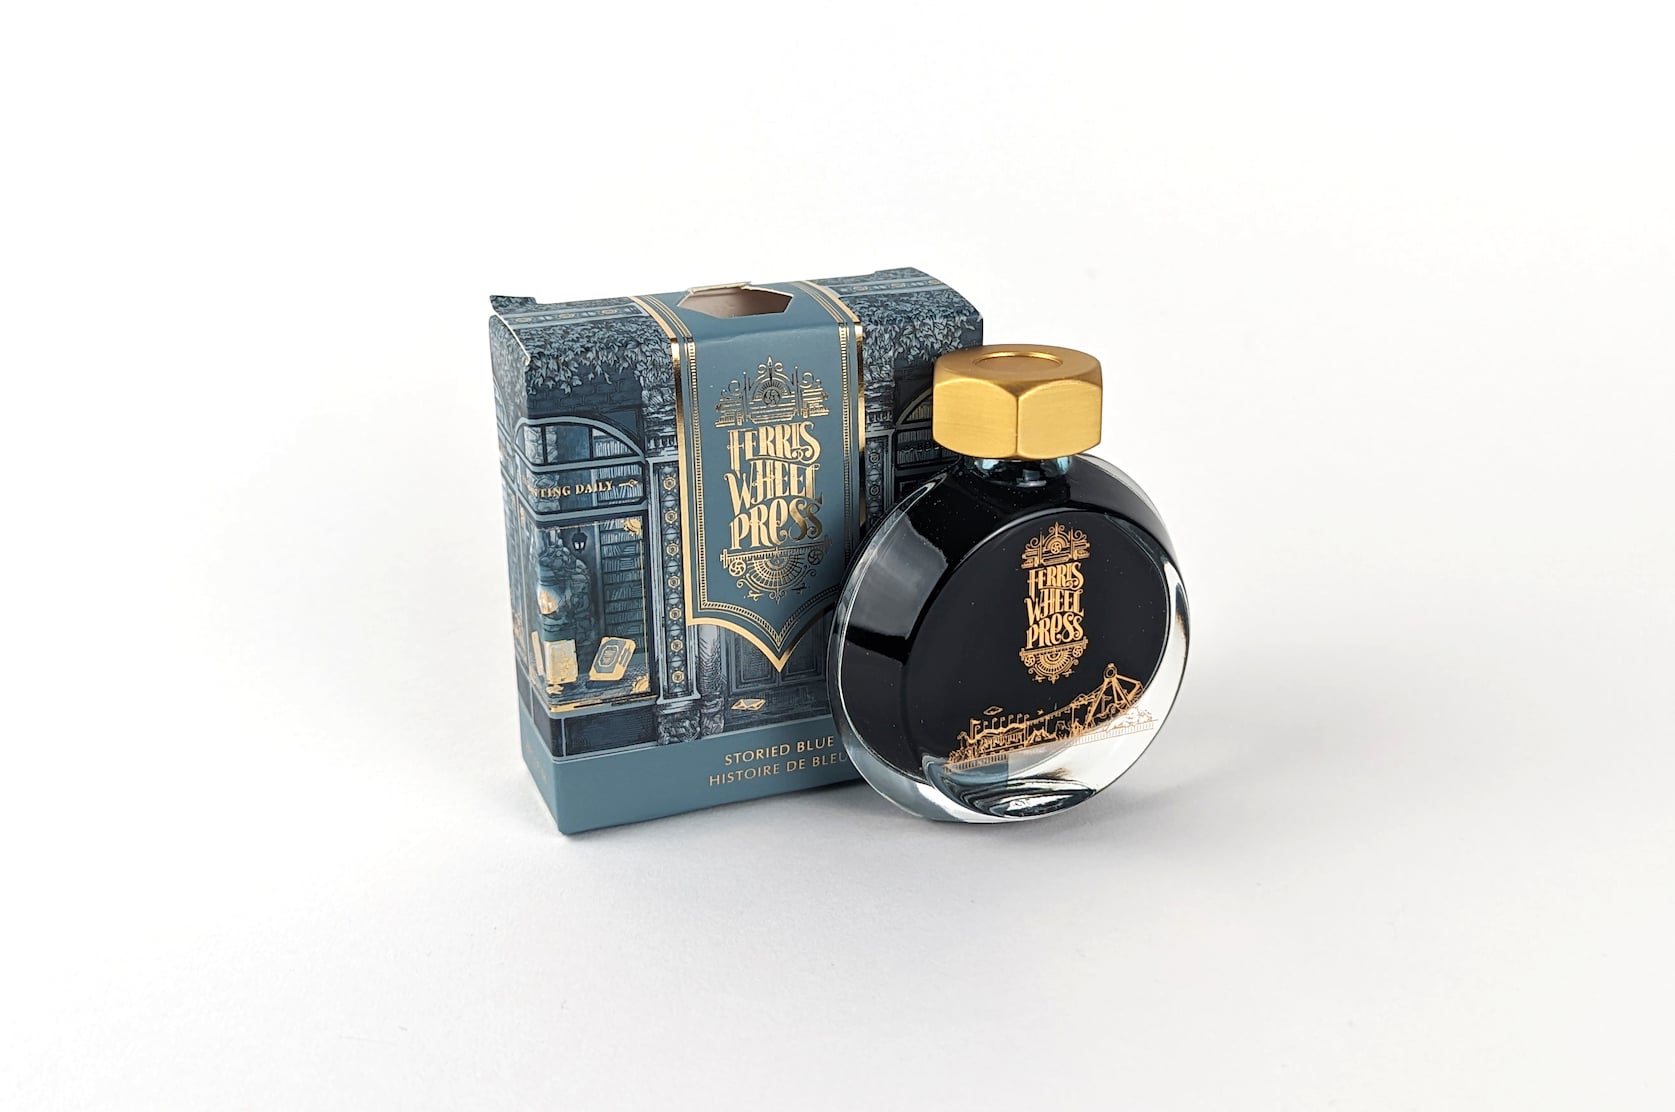 An ornate blue & gold cardboard box with gold text that reads Ferris Wheel Press: Storied Blue. Histoire de Bleu. Beside the box there is a round glass bottle of ink with a gold lid. On the bottle there is a small gold illustration featuring a merry-go-round and circus tent.